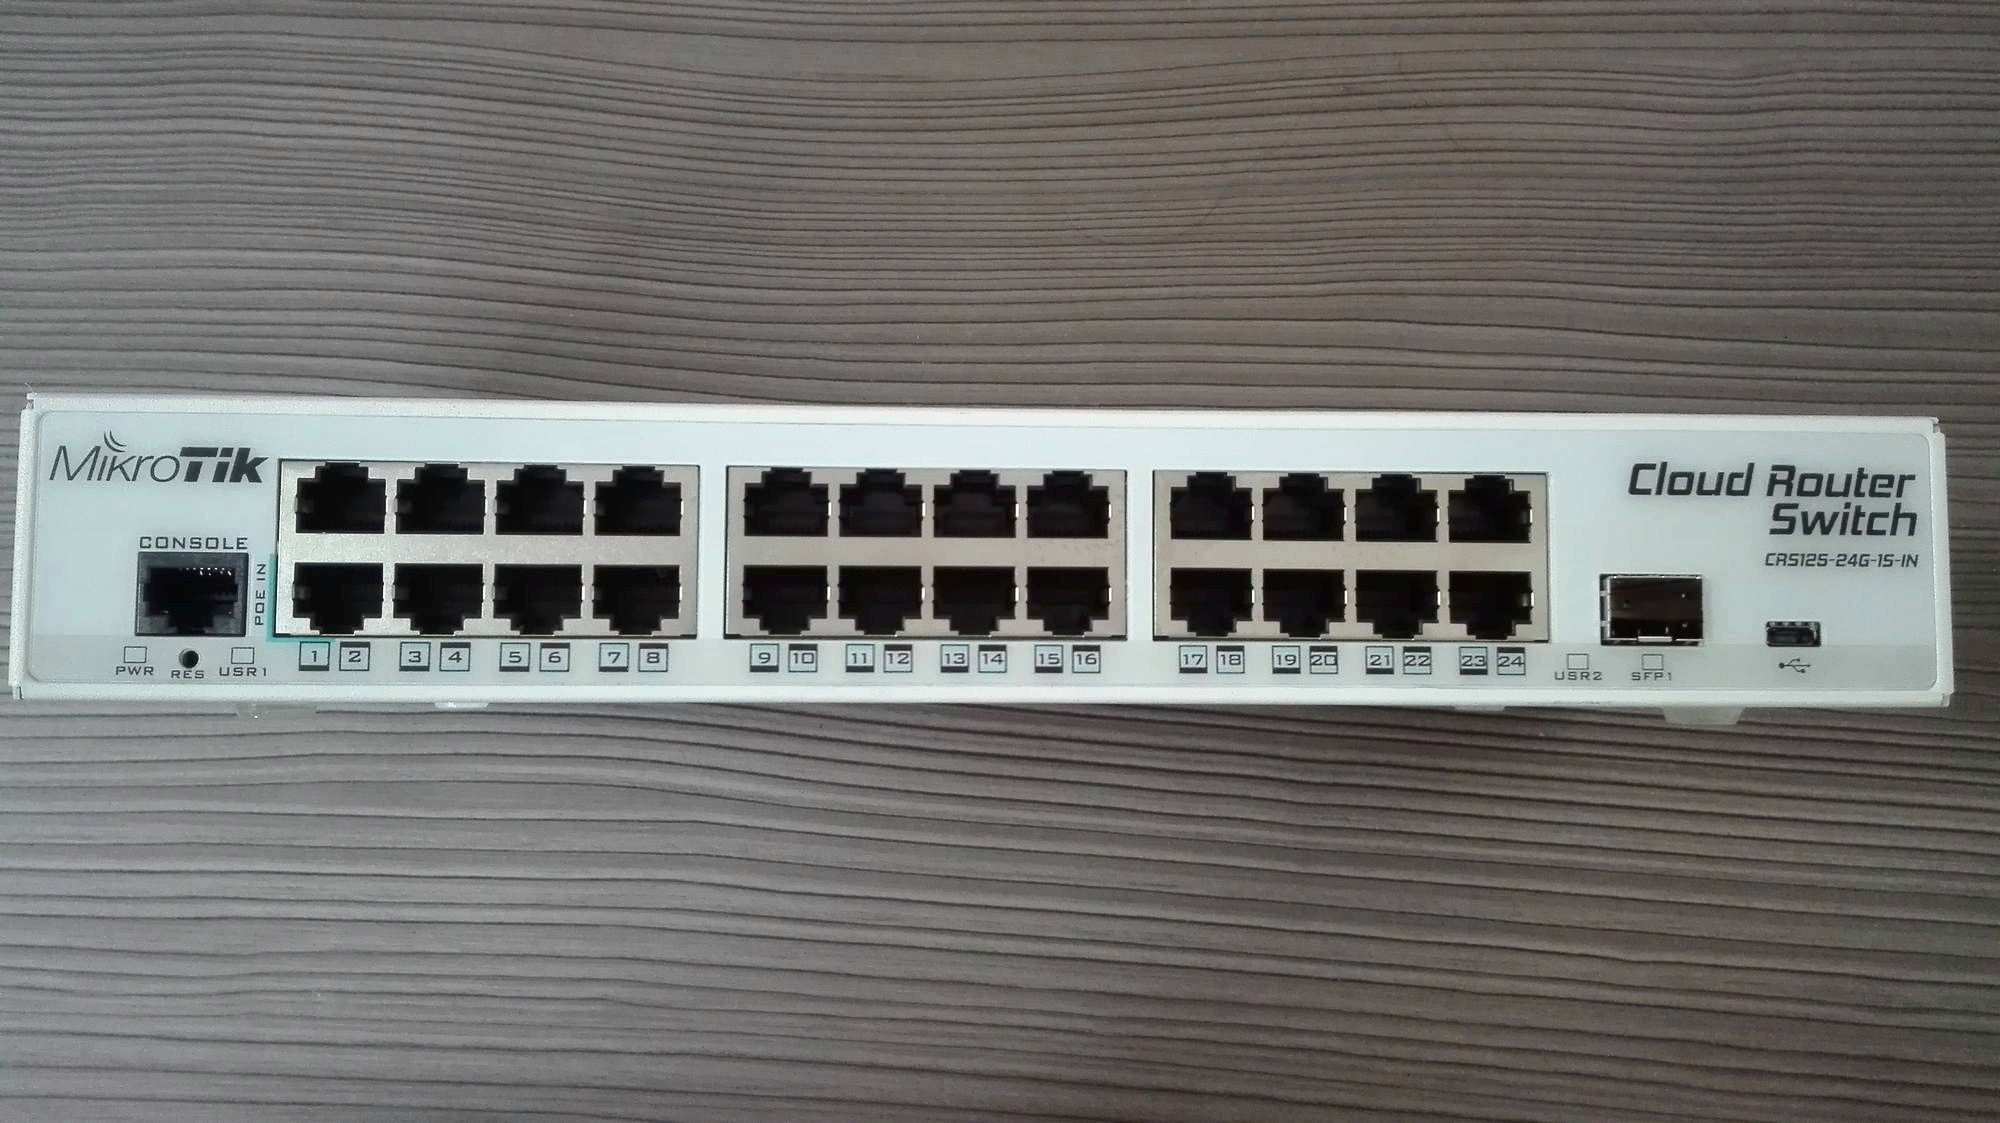 G 24 0. Mikrotik crs125-24g. Mikrotik 125-24g-1s-in. Mikrotik cloud Router Switch crs125-24g-1s-in. Crs125-24g-1s.